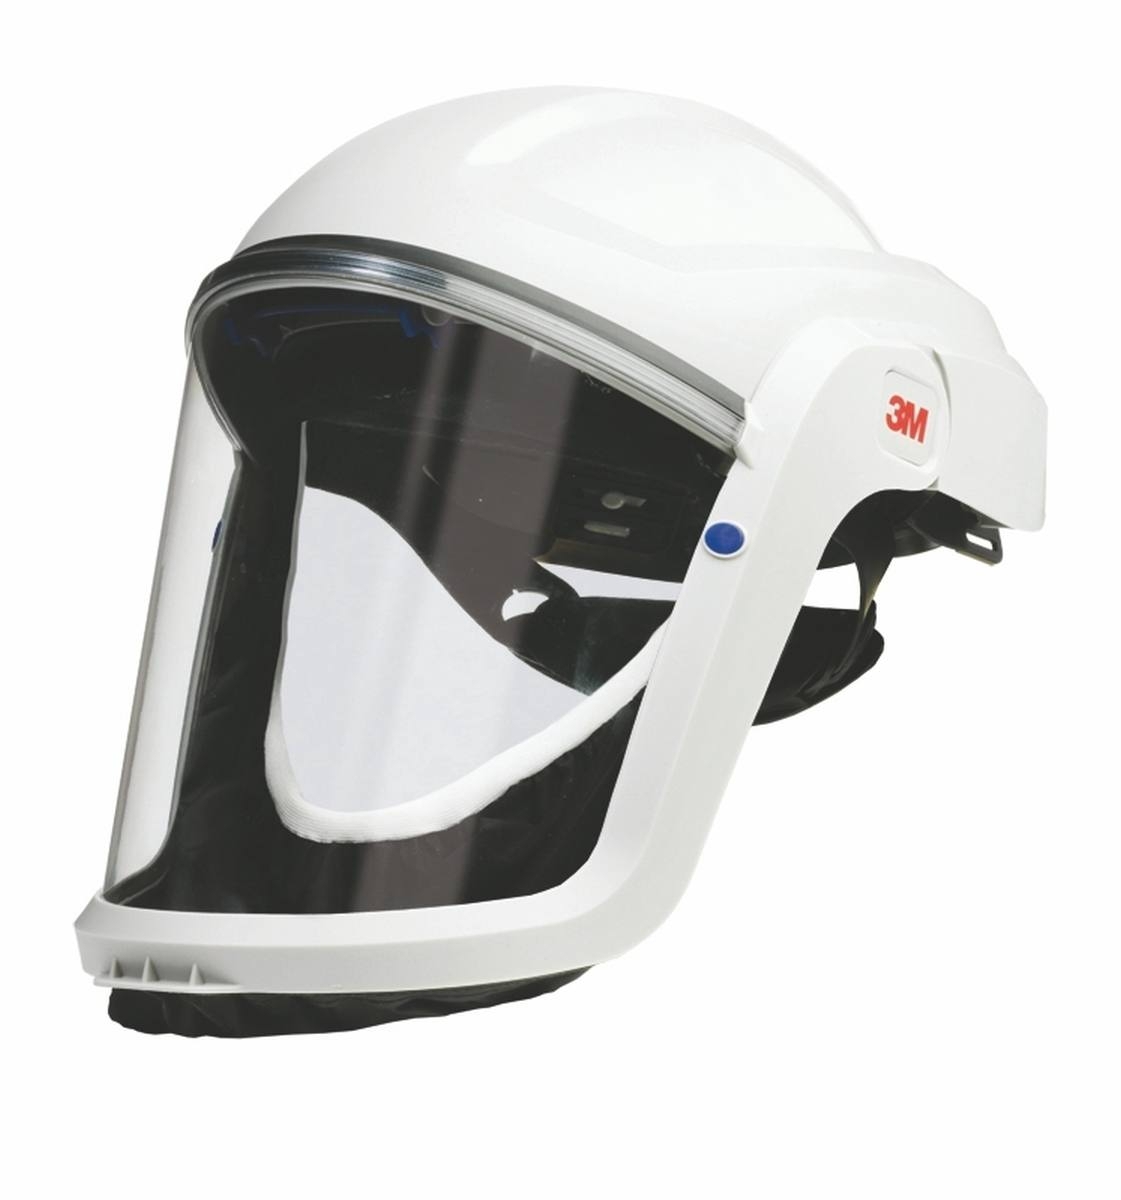 3M TR-315E Versaflo starter pack incl. TR-302E, accessories and 3M Versaflo safety helmet M206 with comfort face seal and polycarbonate visor, clear